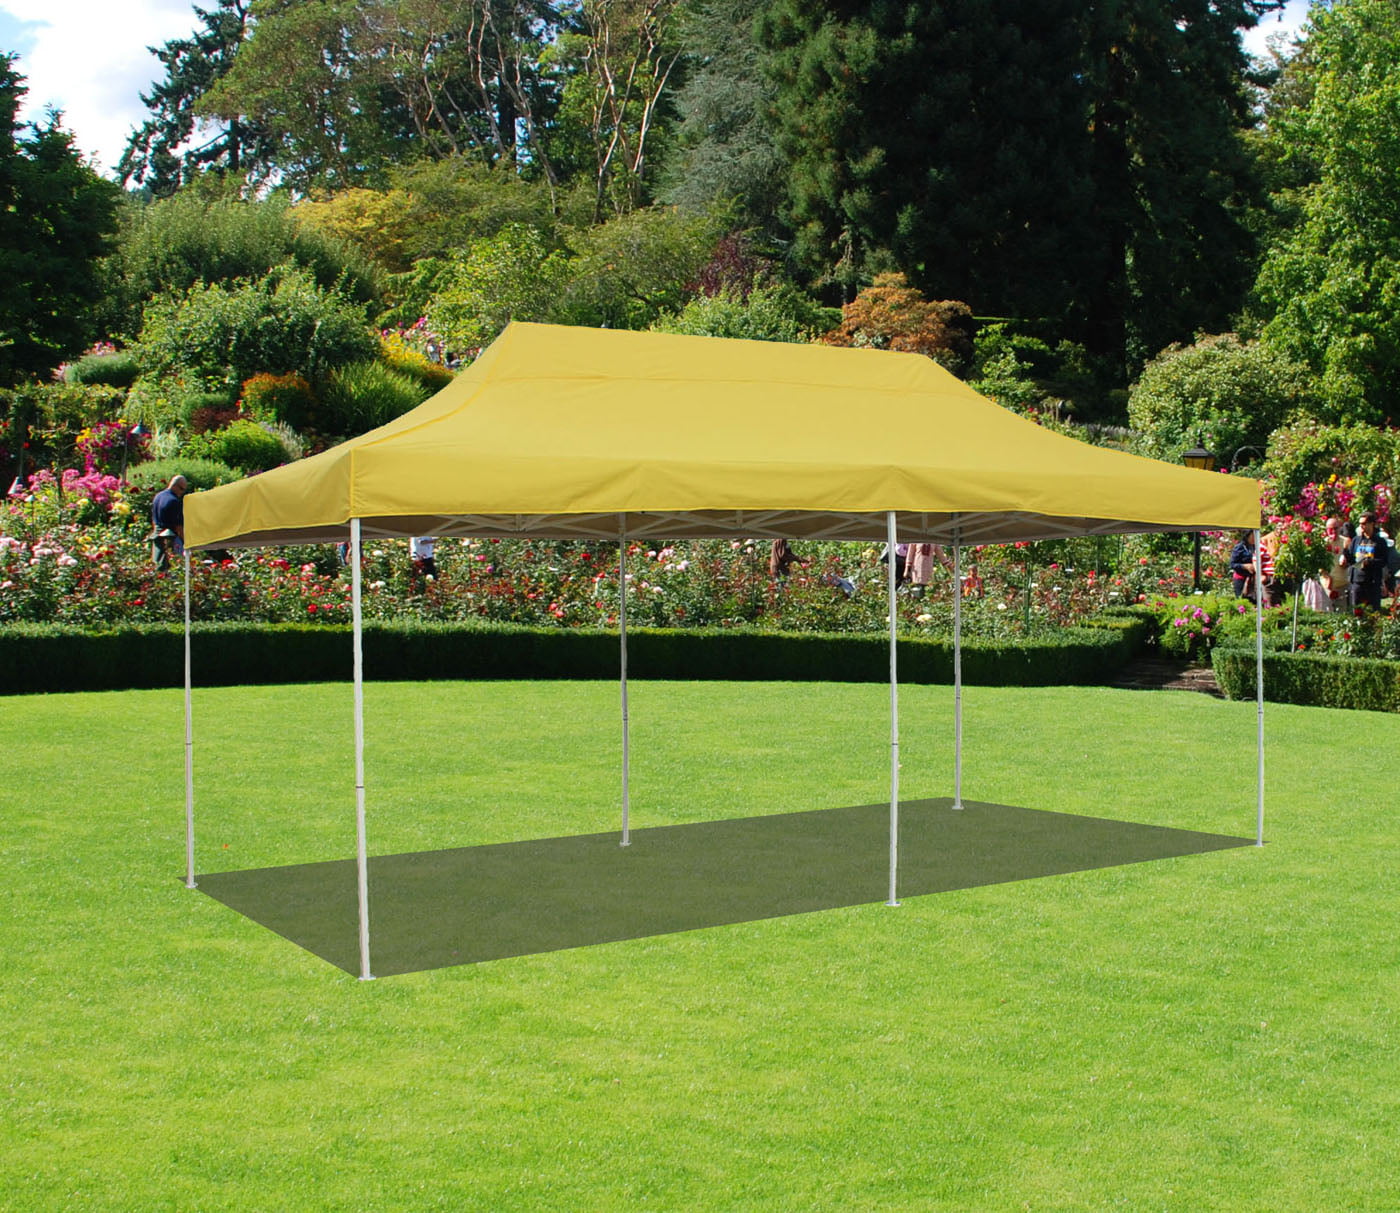 Canopy 10x20 Commercial Fair Shelter Car Shelter Wedding Pop Up Tent Heavy Duty 